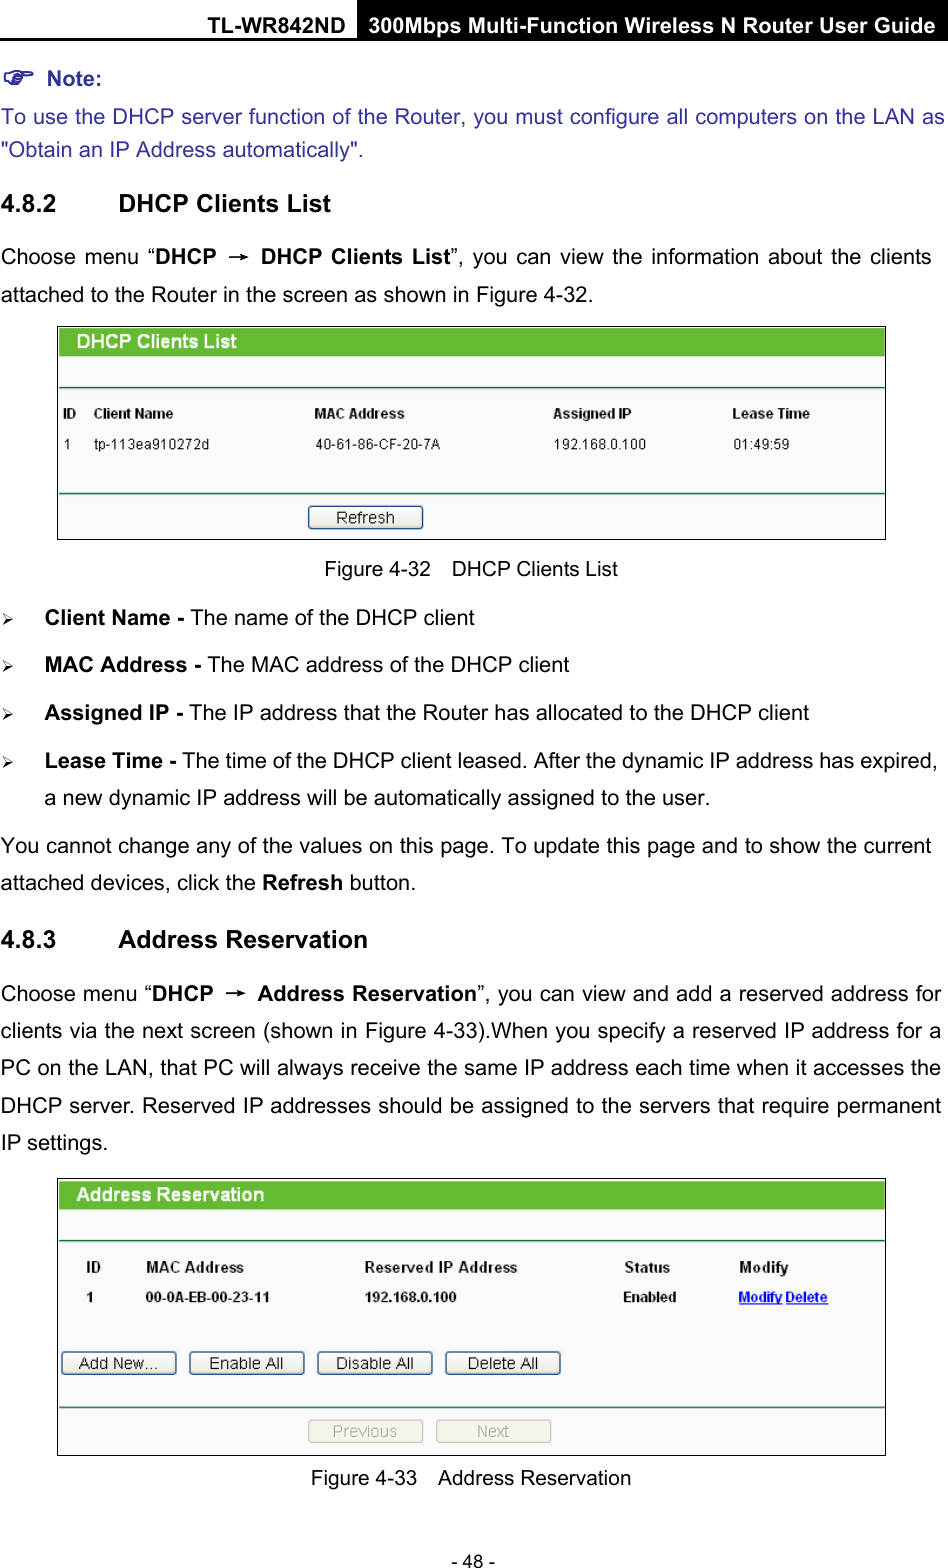 TL-WR842ND 300Mbps Multi-Function Wireless N Router User Guide  - 48 -  Note: To use the DHCP server function of the Router, you must configure all computers on the LAN as &quot;Obtain an IP Address automatically&quot;. 4.8.2 DHCP Clients List Choose menu “DHCP → DHCP Clients List”, you can view the information about the clients attached to the Router in the screen as shown in Figure 4-32.  Figure 4-32  DHCP Clients List  Client Name - The name of the DHCP client    MAC Address - The MAC address of the DHCP client    Assigned IP - The IP address that the Router has allocated to the DHCP client  Lease Time - The time of the DHCP client leased. After the dynamic IP address has expired, a new dynamic IP address will be automatically assigned to the user.     You cannot change any of the values on this page. To update this page and to show the current attached devices, click the Refresh button. 4.8.3 Address Reservation Choose menu “DHCP → Address Reservation”, you can view and add a reserved address for clients via the next screen (shown in Figure 4-33).When you specify a reserved IP address for a PC on the LAN, that PC will always receive the same IP address each time when it accesses the DHCP server. Reserved IP addresses should be assigned to the servers that require permanent IP settings.    Figure 4-33  Address Reservation 